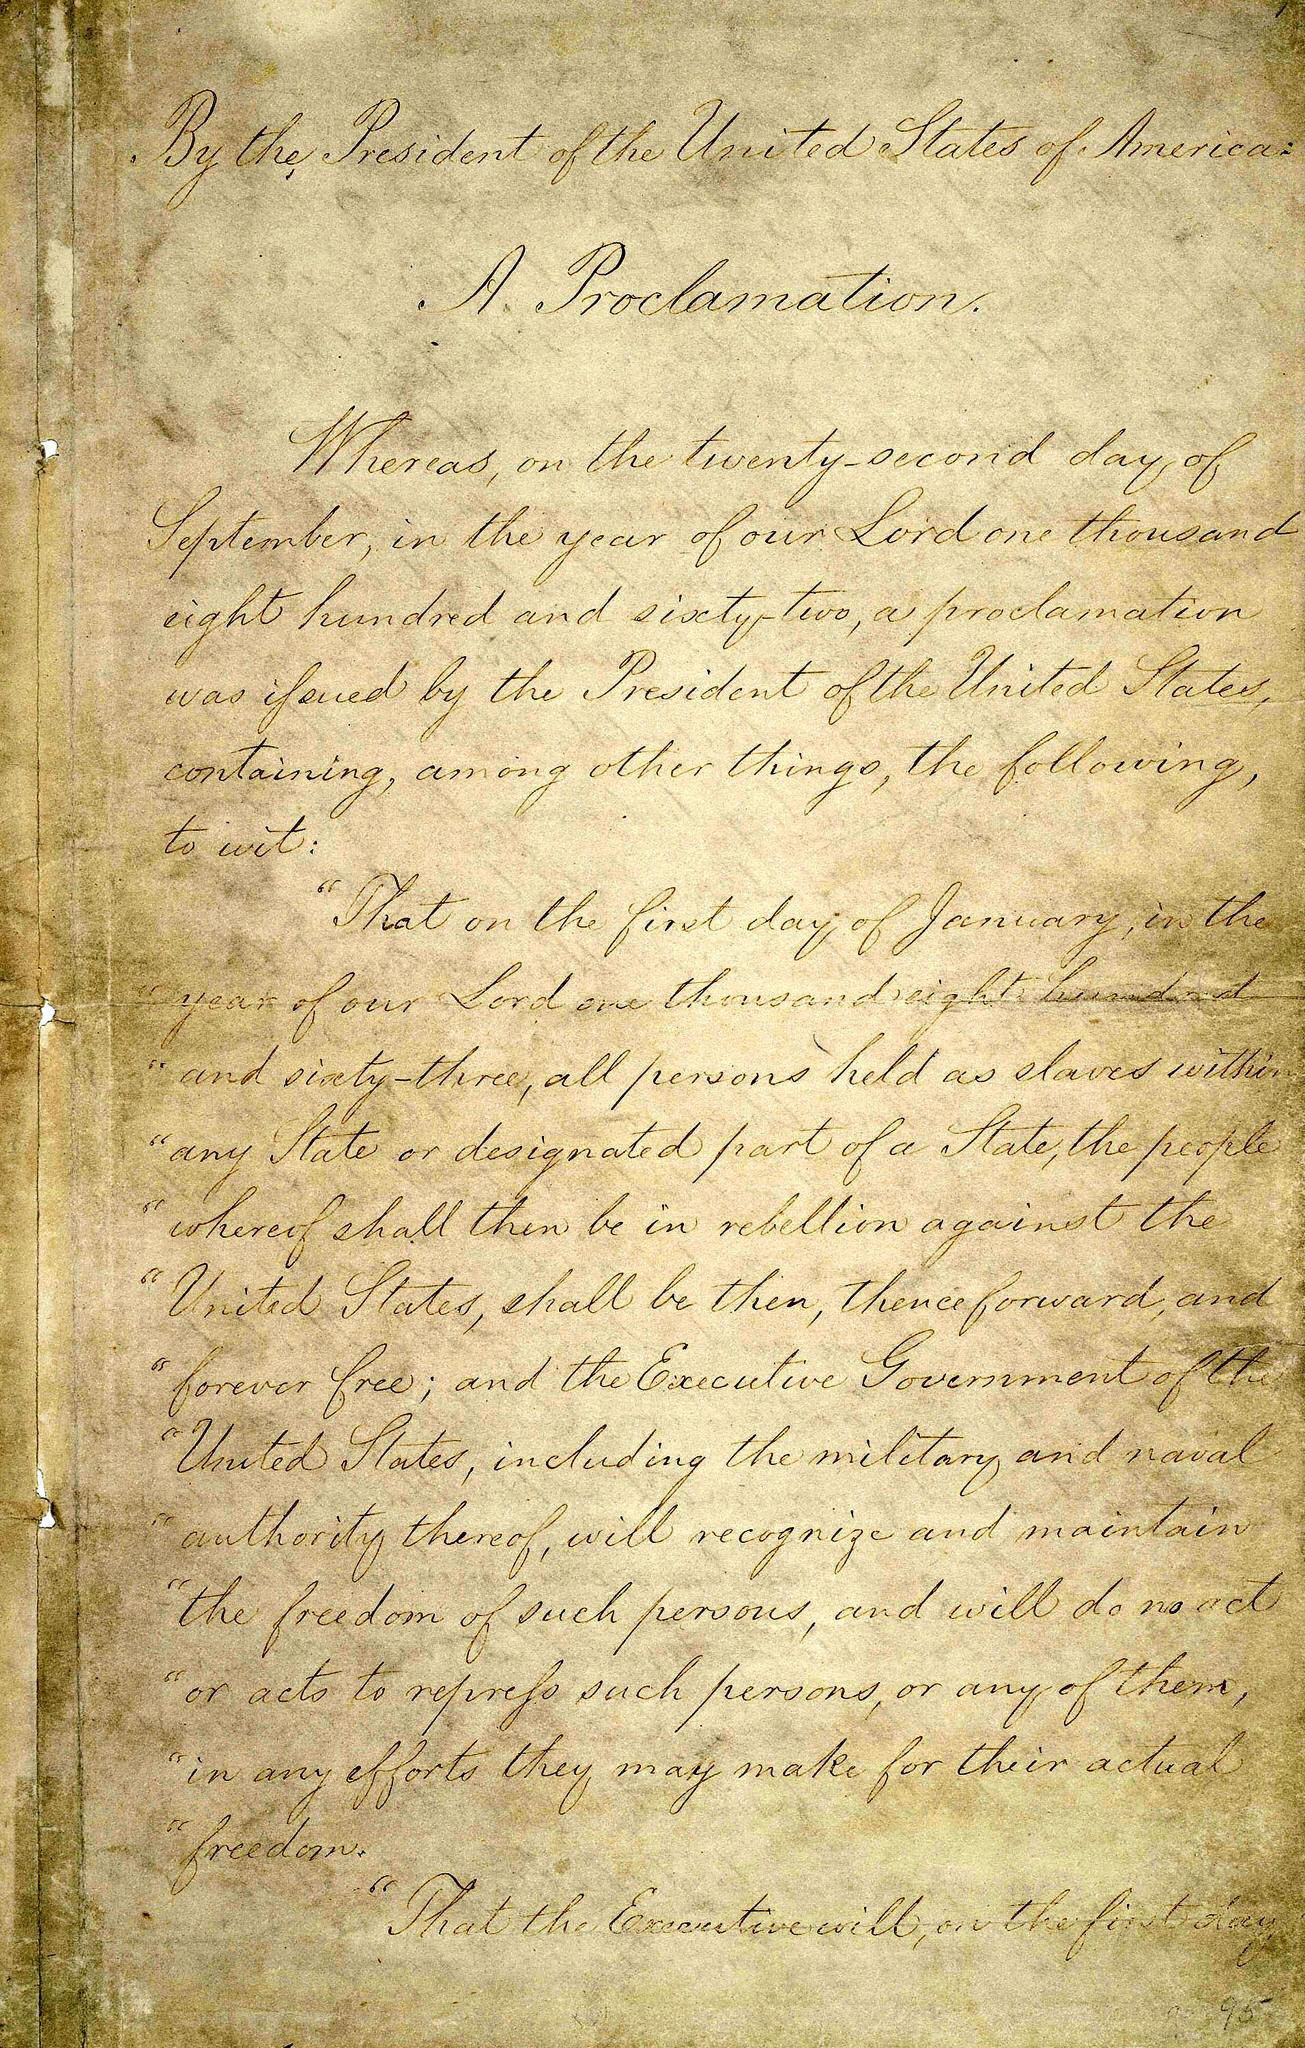 Page 1 of the Emancipation Proclamation